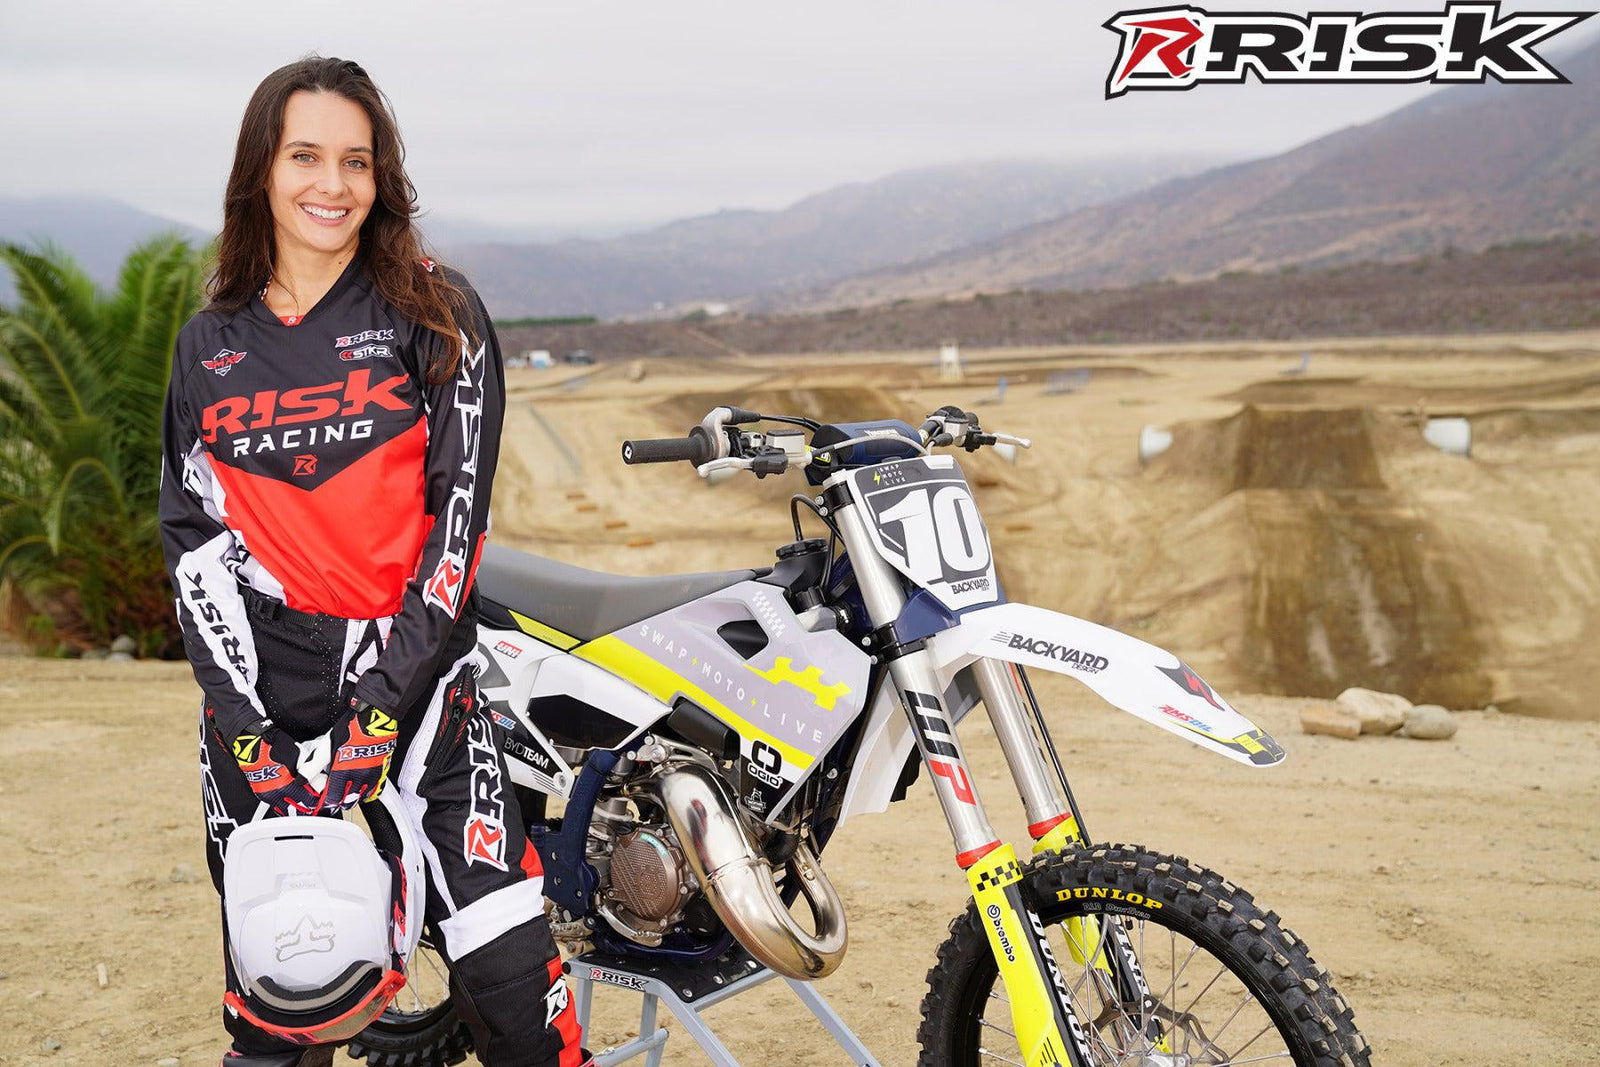 October's Risk Racing Moto Model Jessica Victorino posing in various bikinis and Risk Racing Jerseys next to a dirt bike that's sitting on a Risk Racing RR1-Ride-On stand - Pose #33